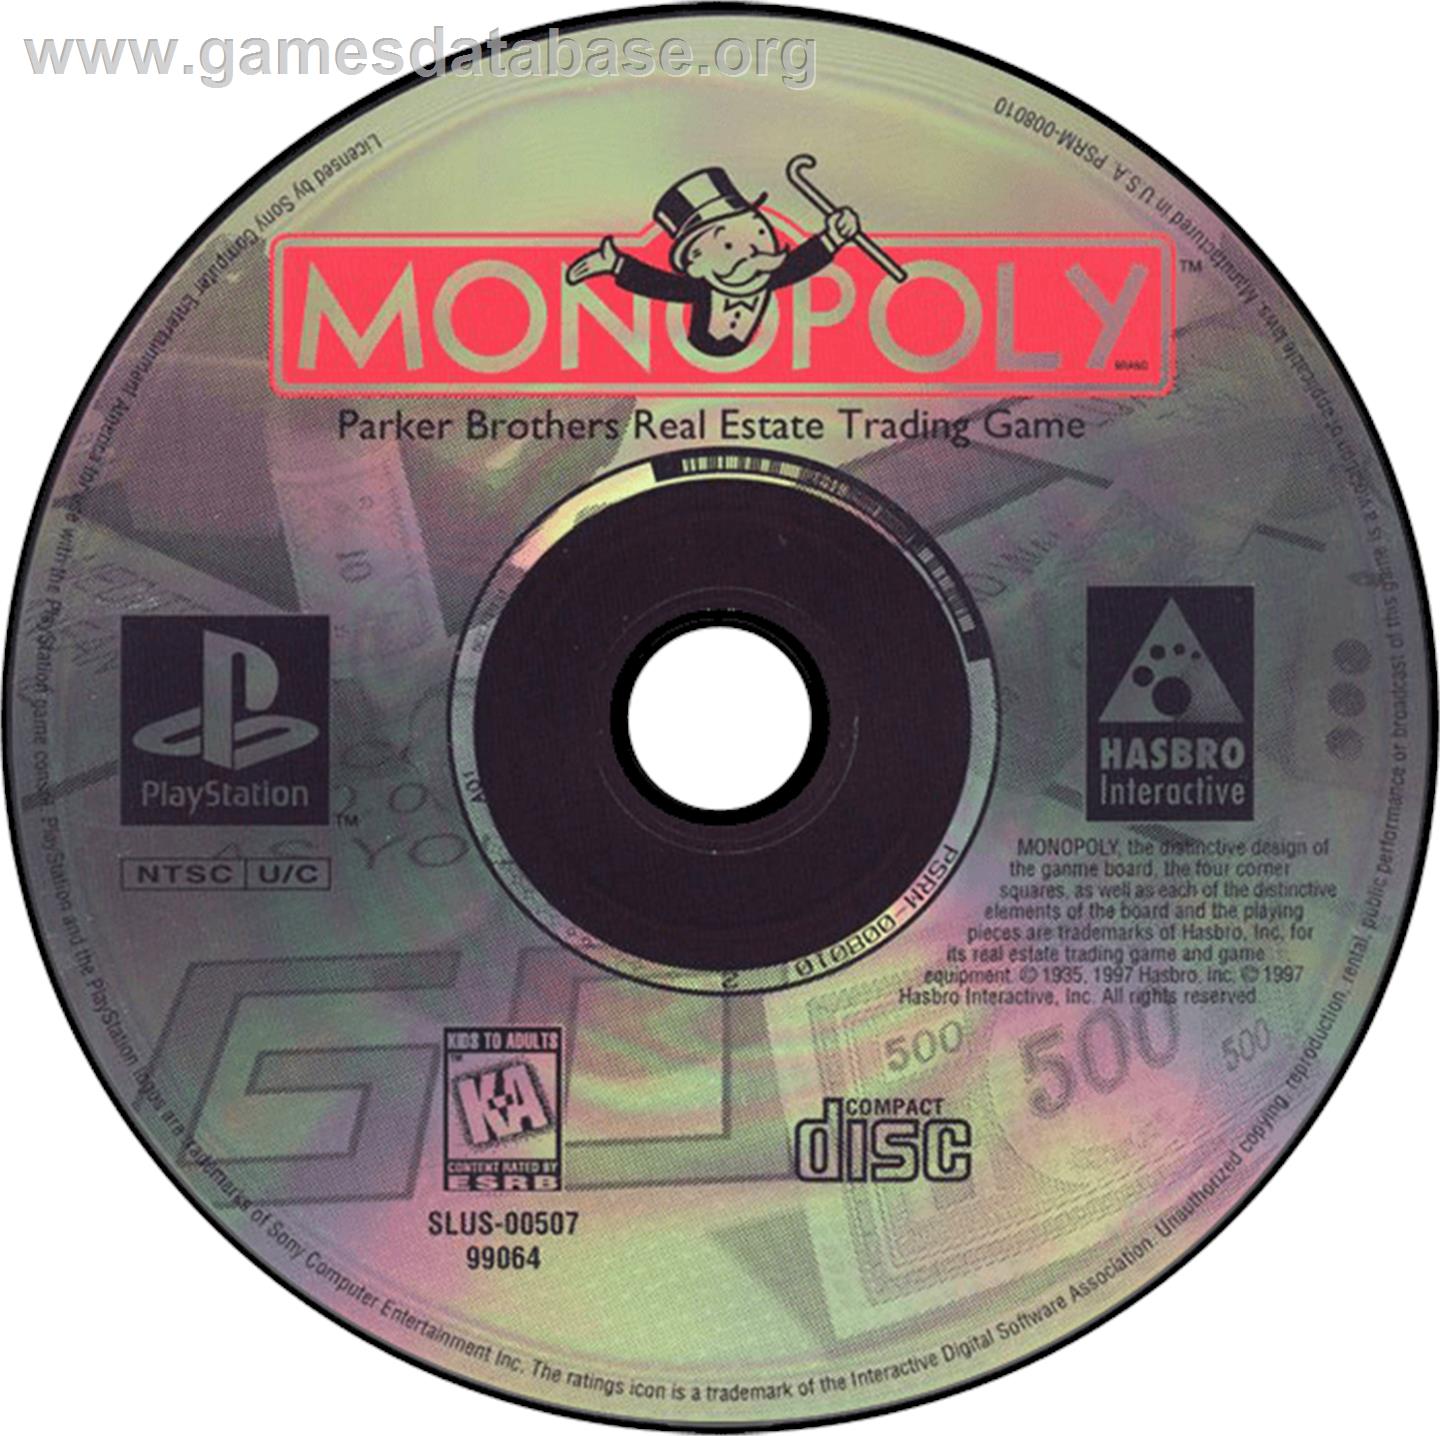 Monopoly - Sony Playstation - Artwork - Disc